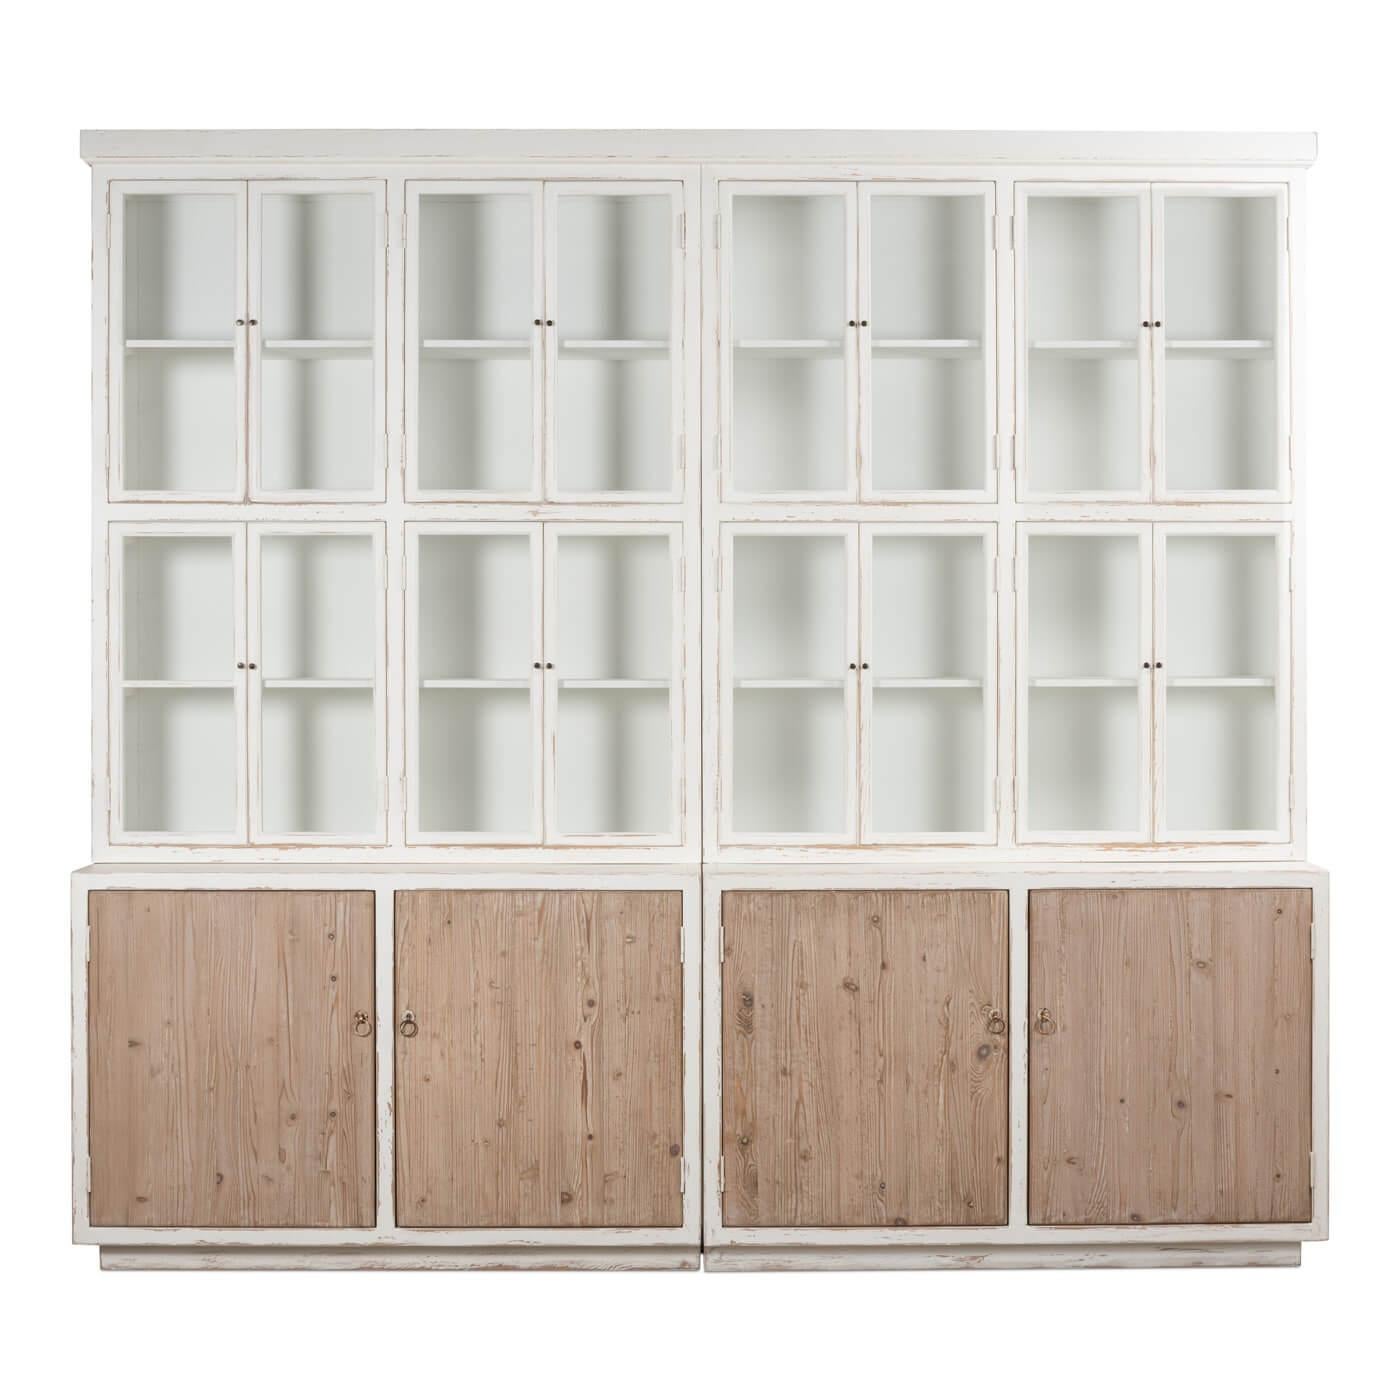 Modern rustic white and natural wood bookcase. The perfect piece for storage and display. The upper cabinet is actually comprised of 8 small compartmental cabinets, each with windowpane-style doors. The base cabinet has 4 natural pine